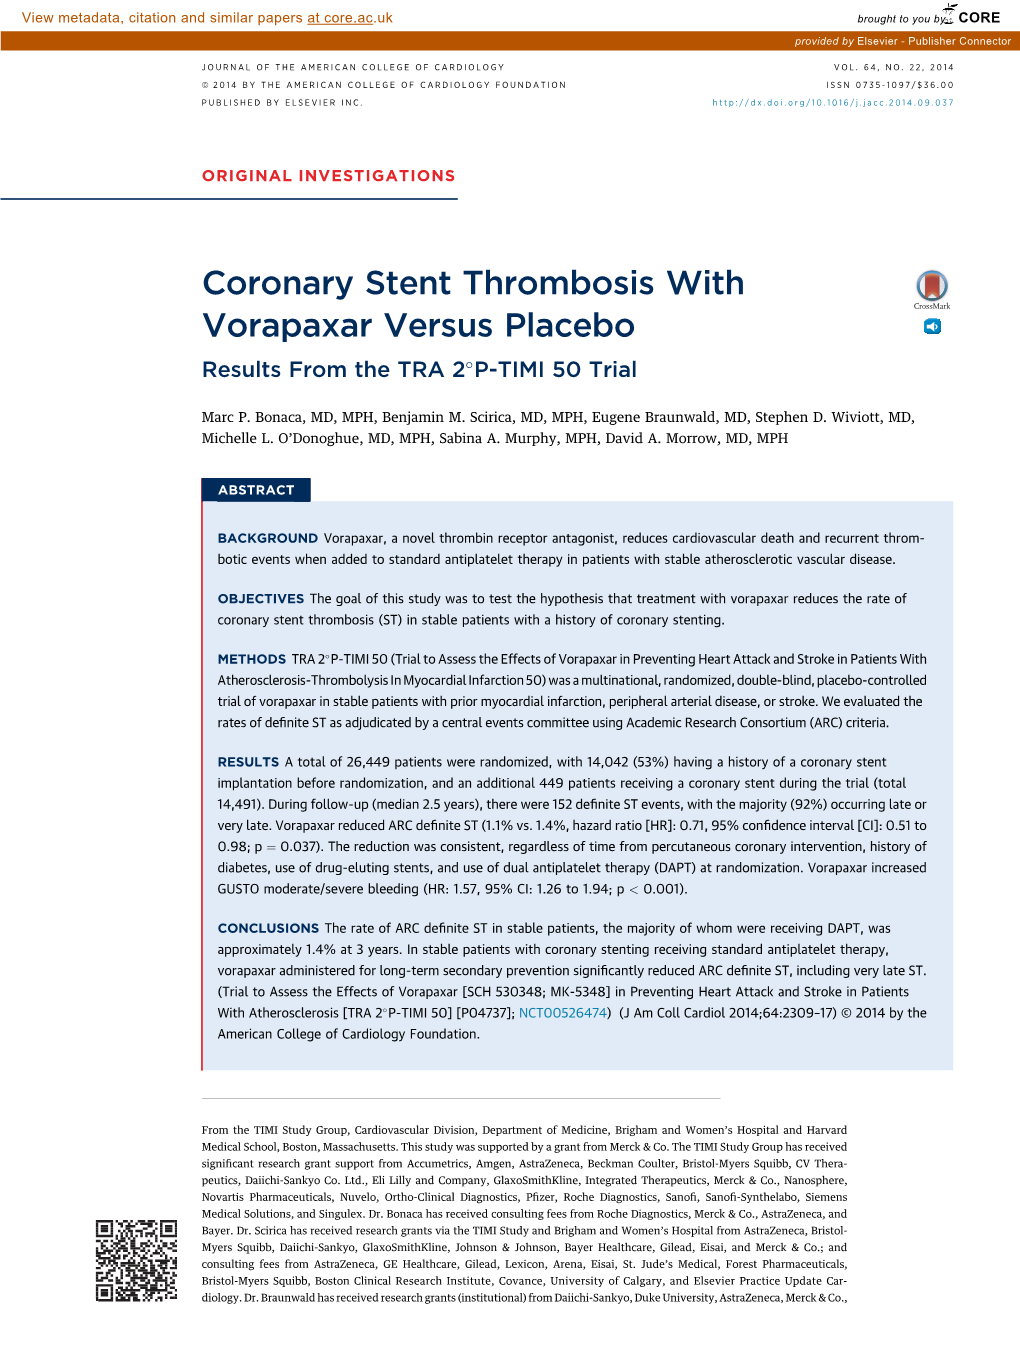 Coronary Stent Thrombosis with Vorapaxar Versus Placebo Results from the TRA 2�P-TIMI 50 Trial